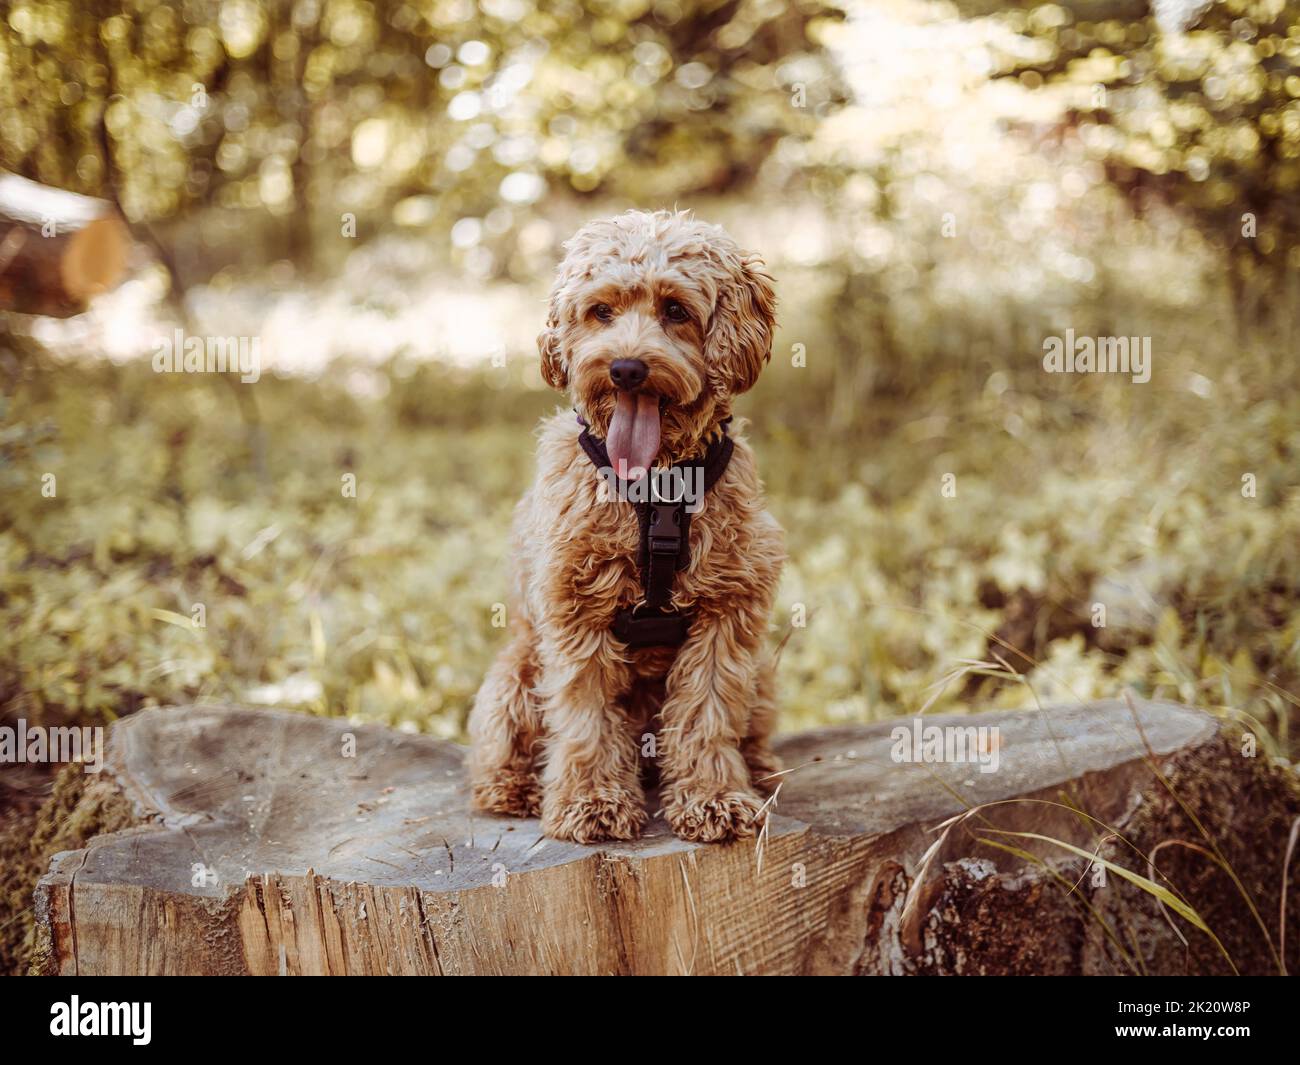 Cavapoo dog wearing black harness sitting steady with tongue out, looking to right side. Female dog with curly fur sitting on the stomp in the woods. Stock Photo